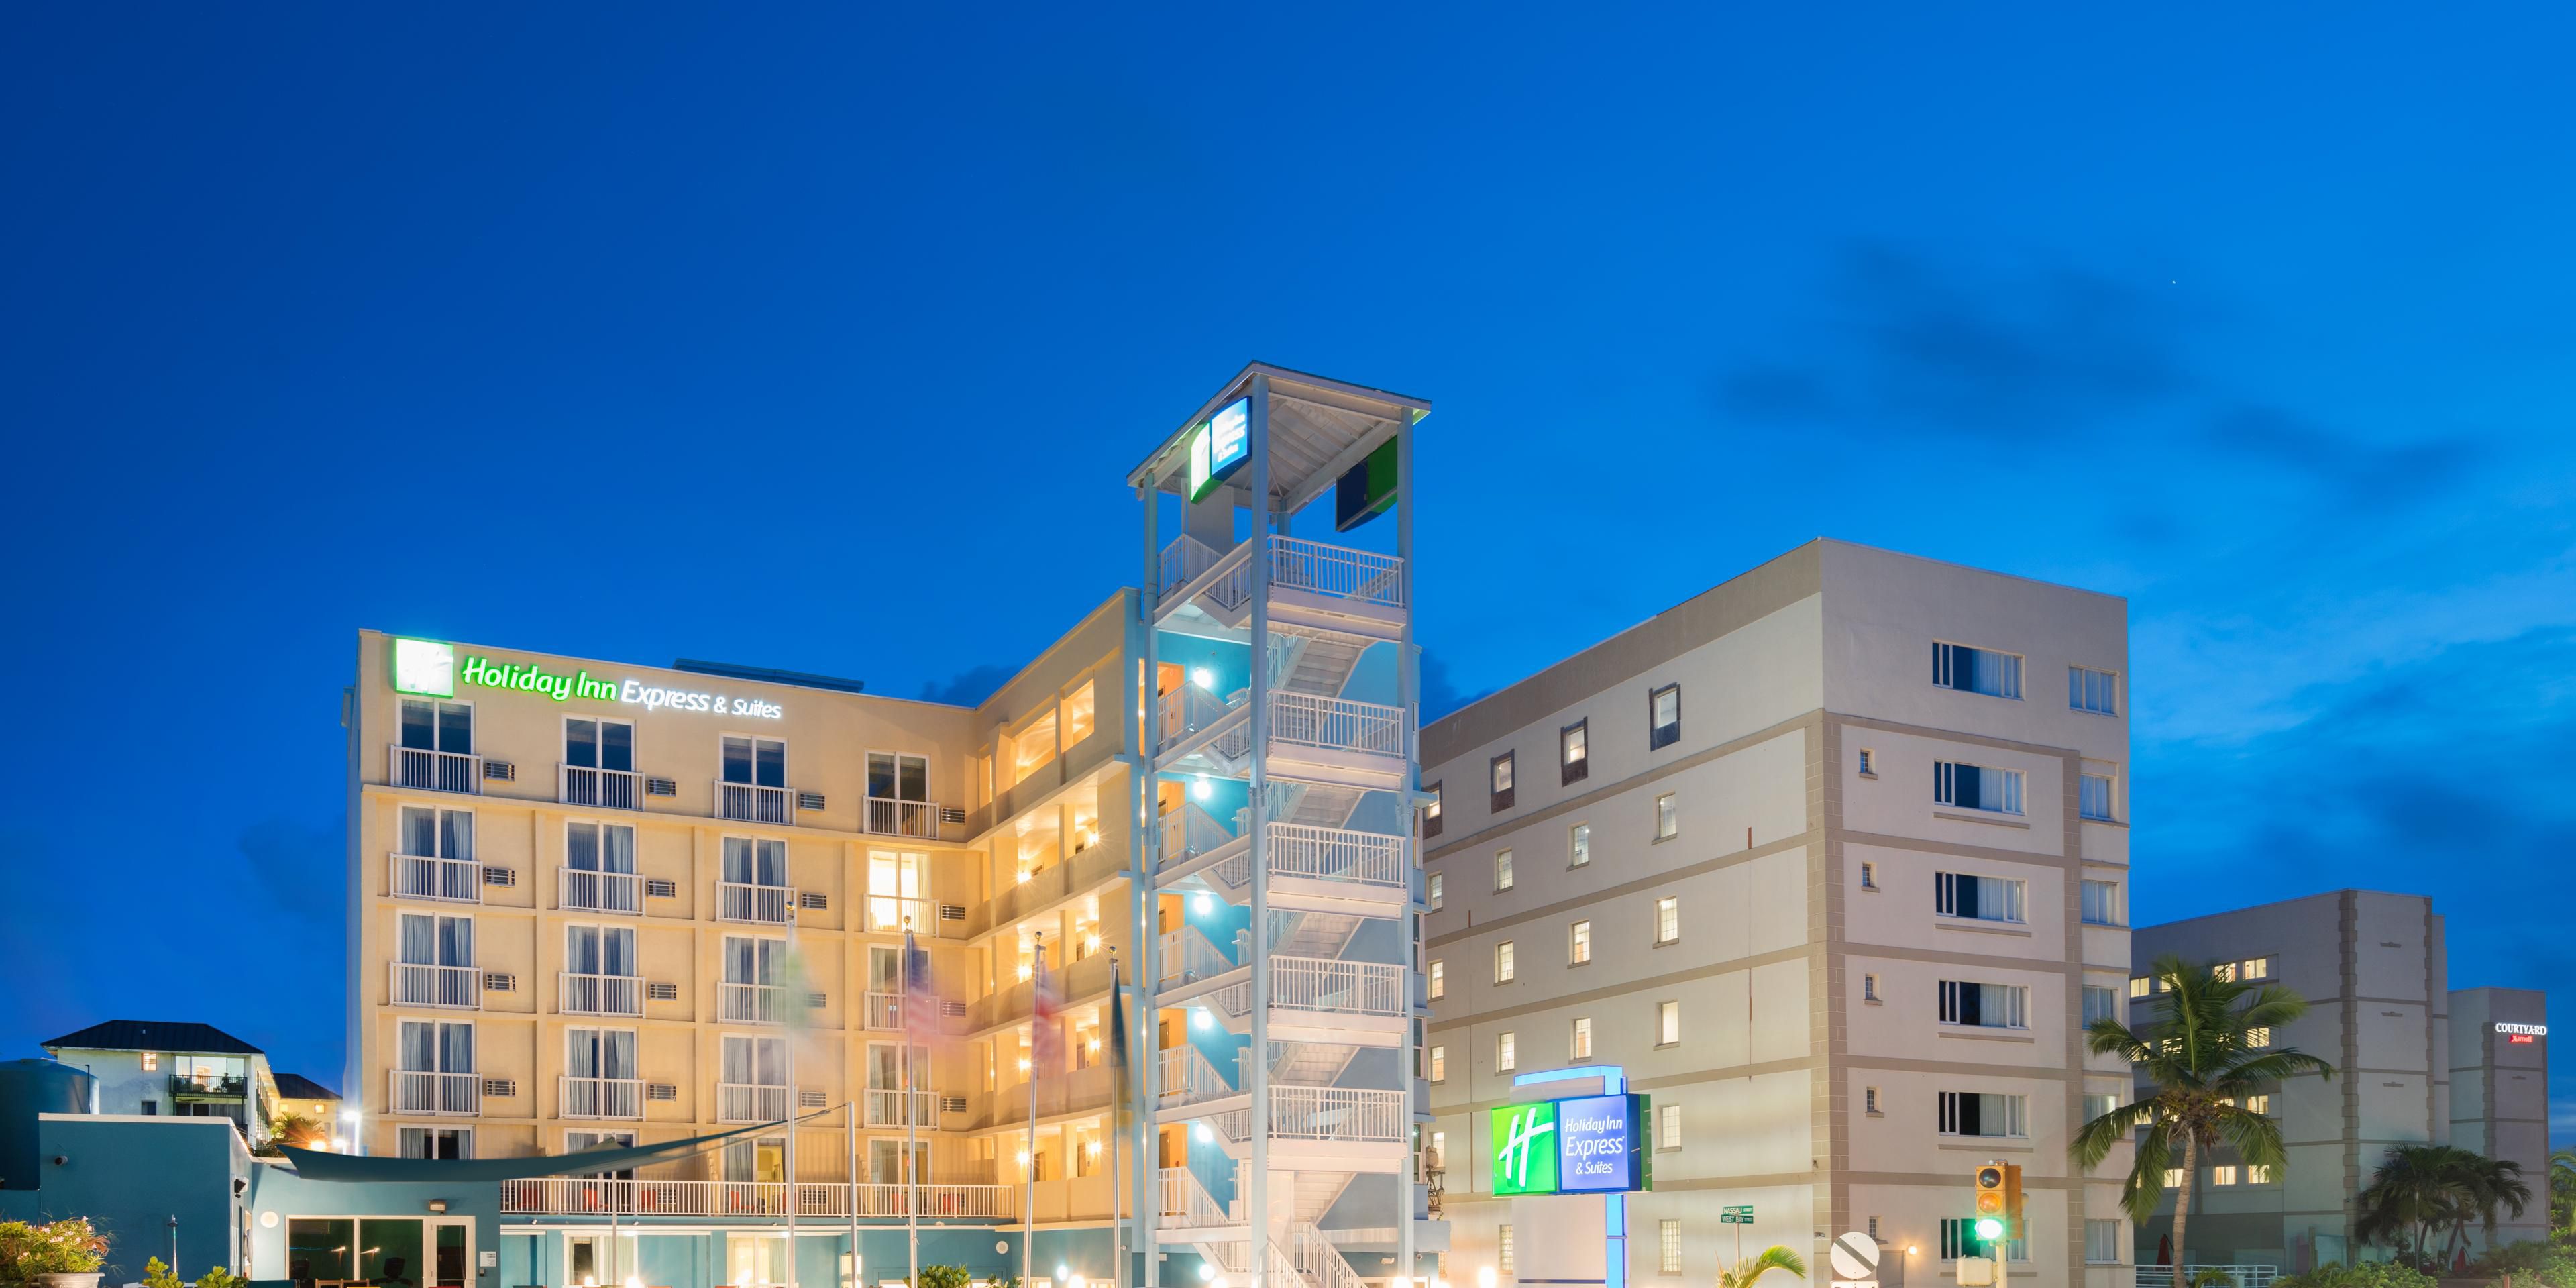 The Holiday Inn Express & Suites welcomes all guests to the wonderful island of Nassau in the Bahamas.Here at the Holiday Inn we strive to provide the very best service to all of our guests.